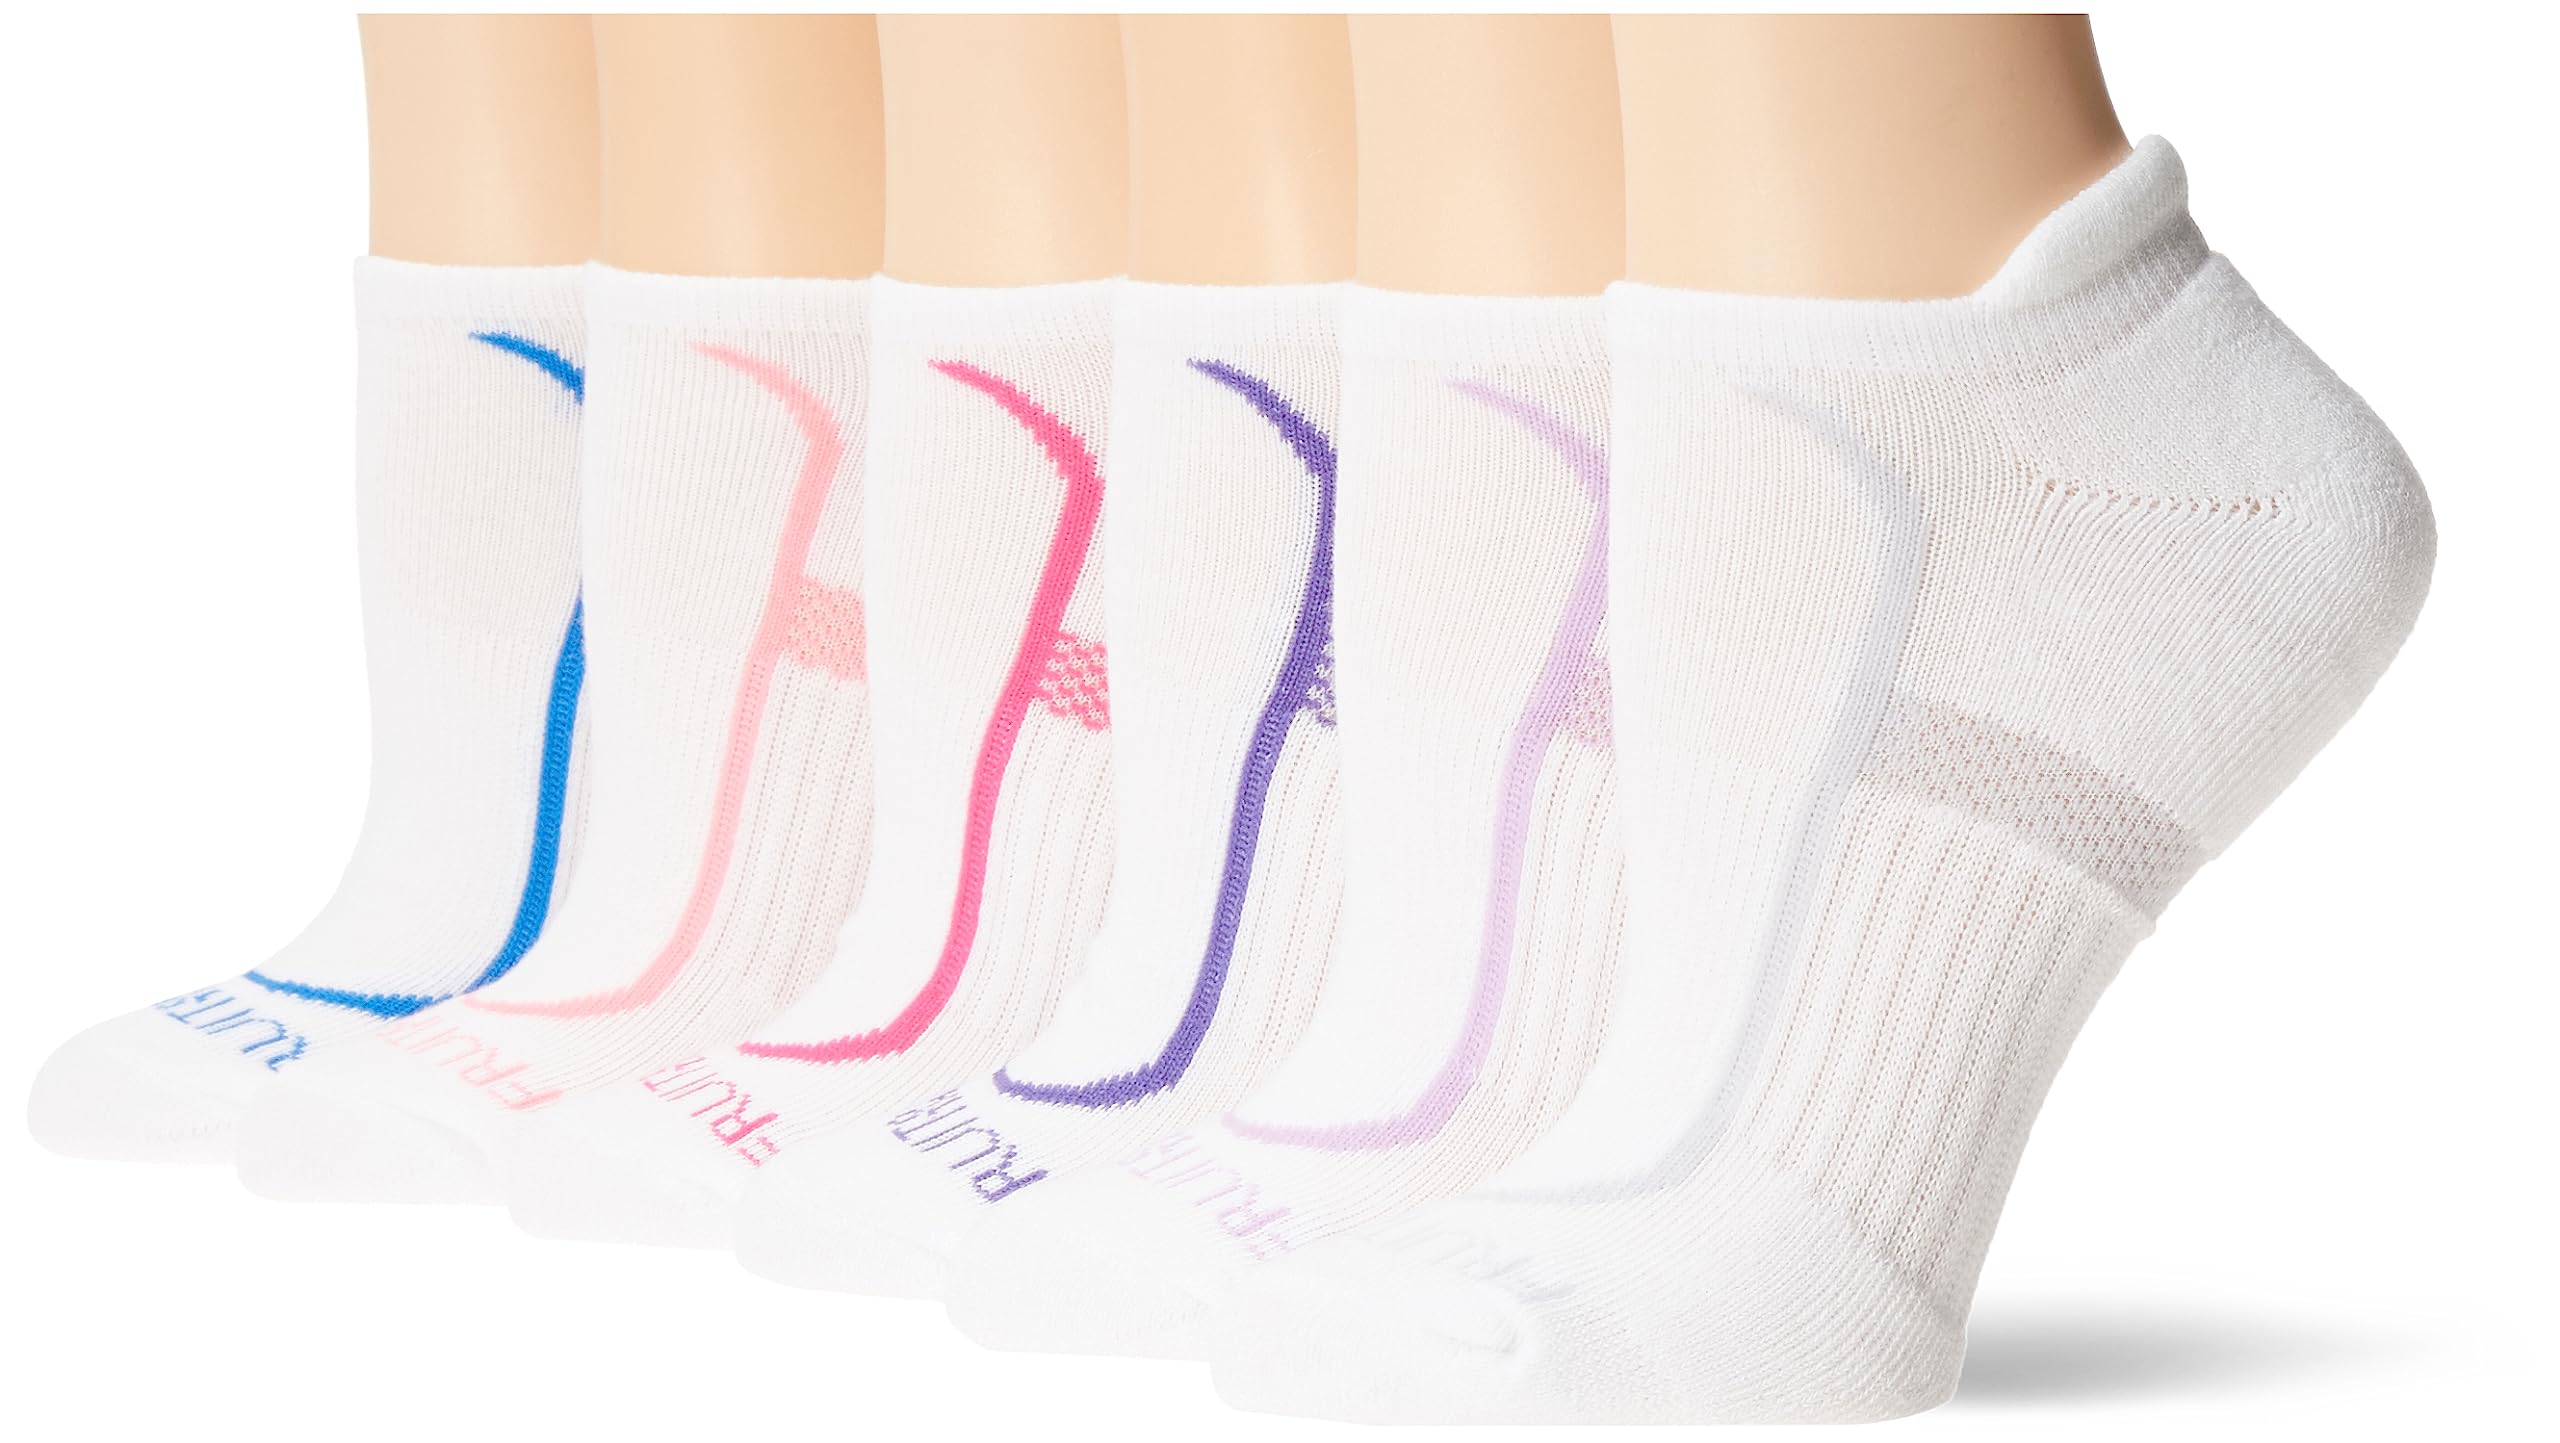 Fruit of the Loom Women's Coolzone Cotton No Show with Tab Socks (6 Pack)